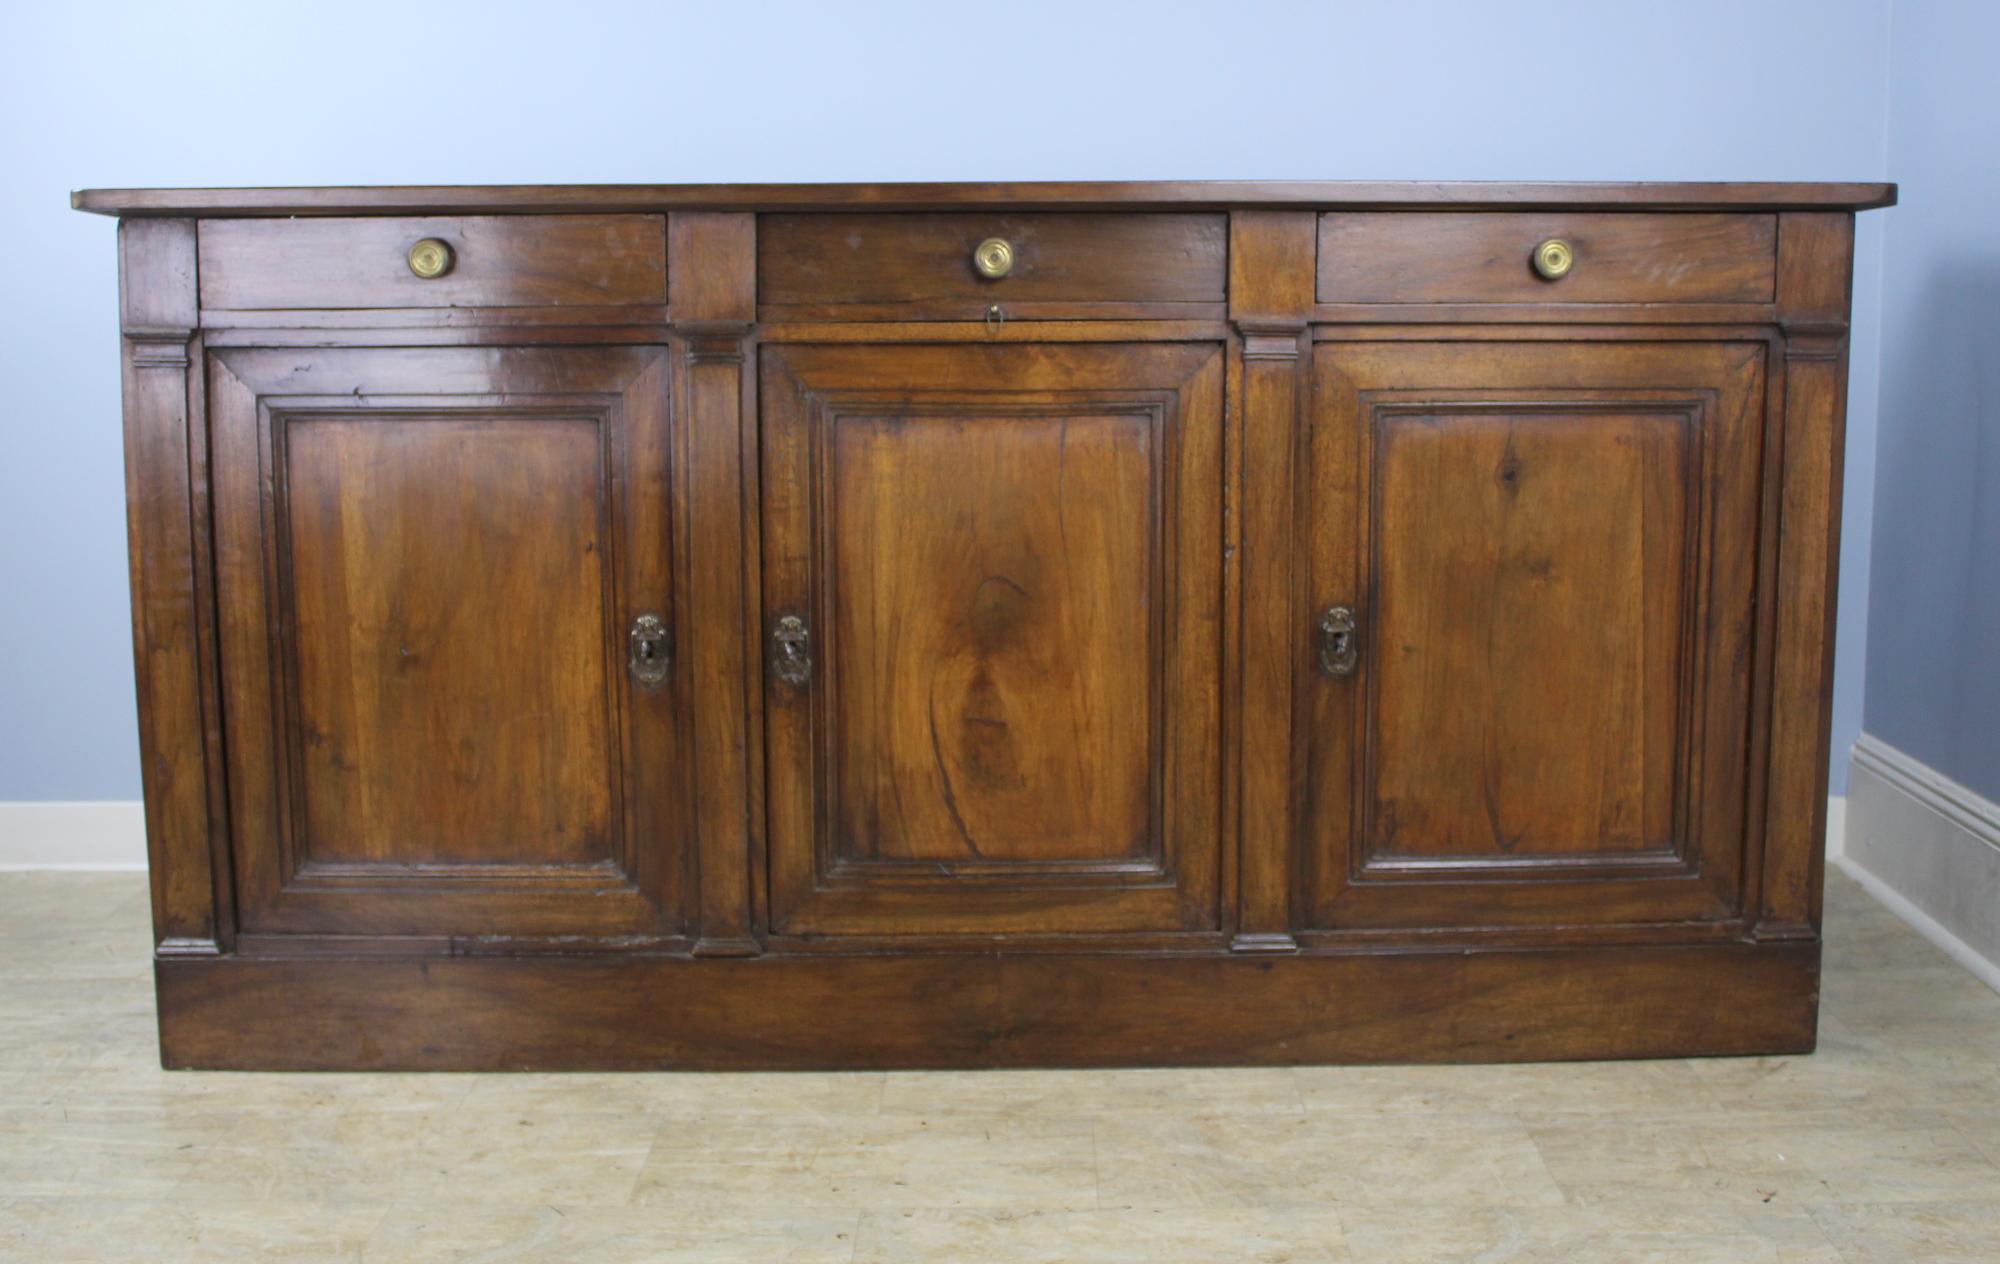 A large and imposing dark walnut enfilade, quite early. Doors have great articulated inset panels and close snugly, each with their own key. Single non-adjustable shelf in each cabinet. There is a beautiful retractable serving shelf under the center